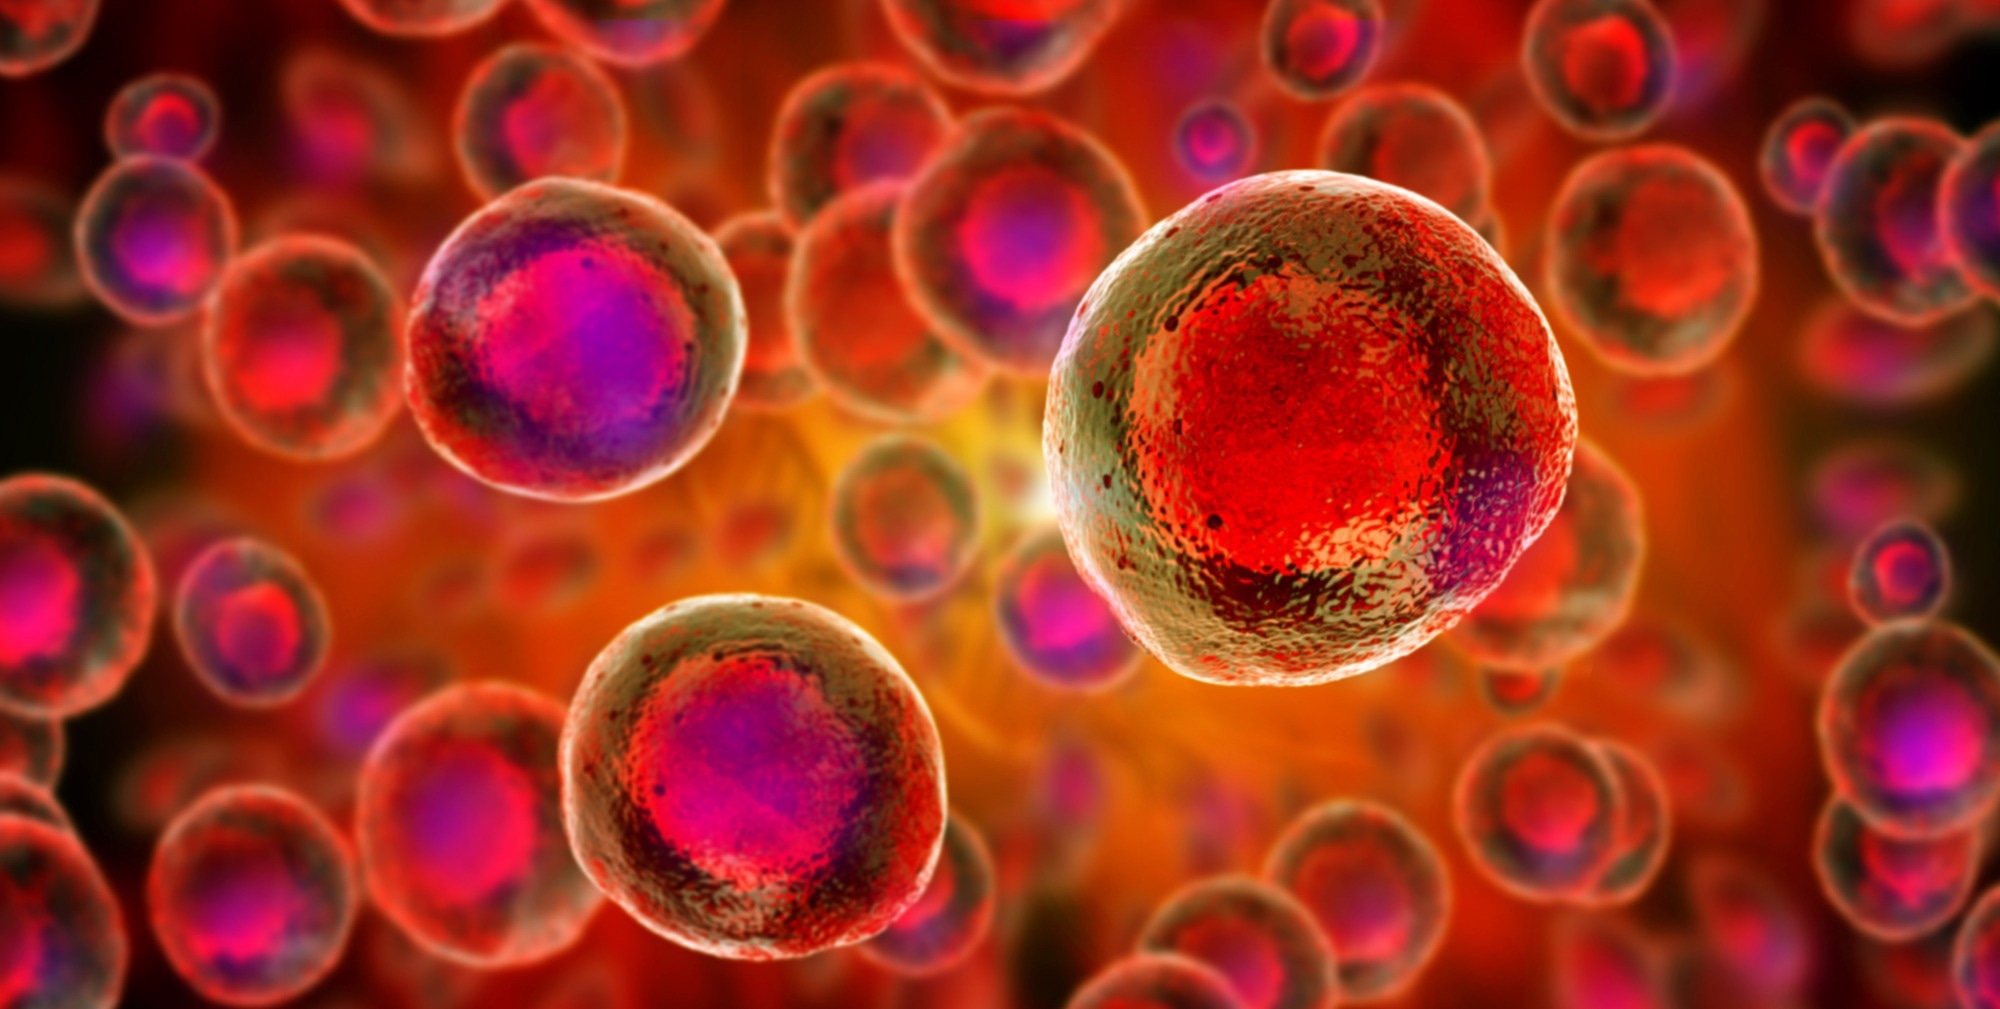 Study: Impact of the Human Cell Atlas on medicine. Image Credit: Giovanni Cancemi / Shutterstock